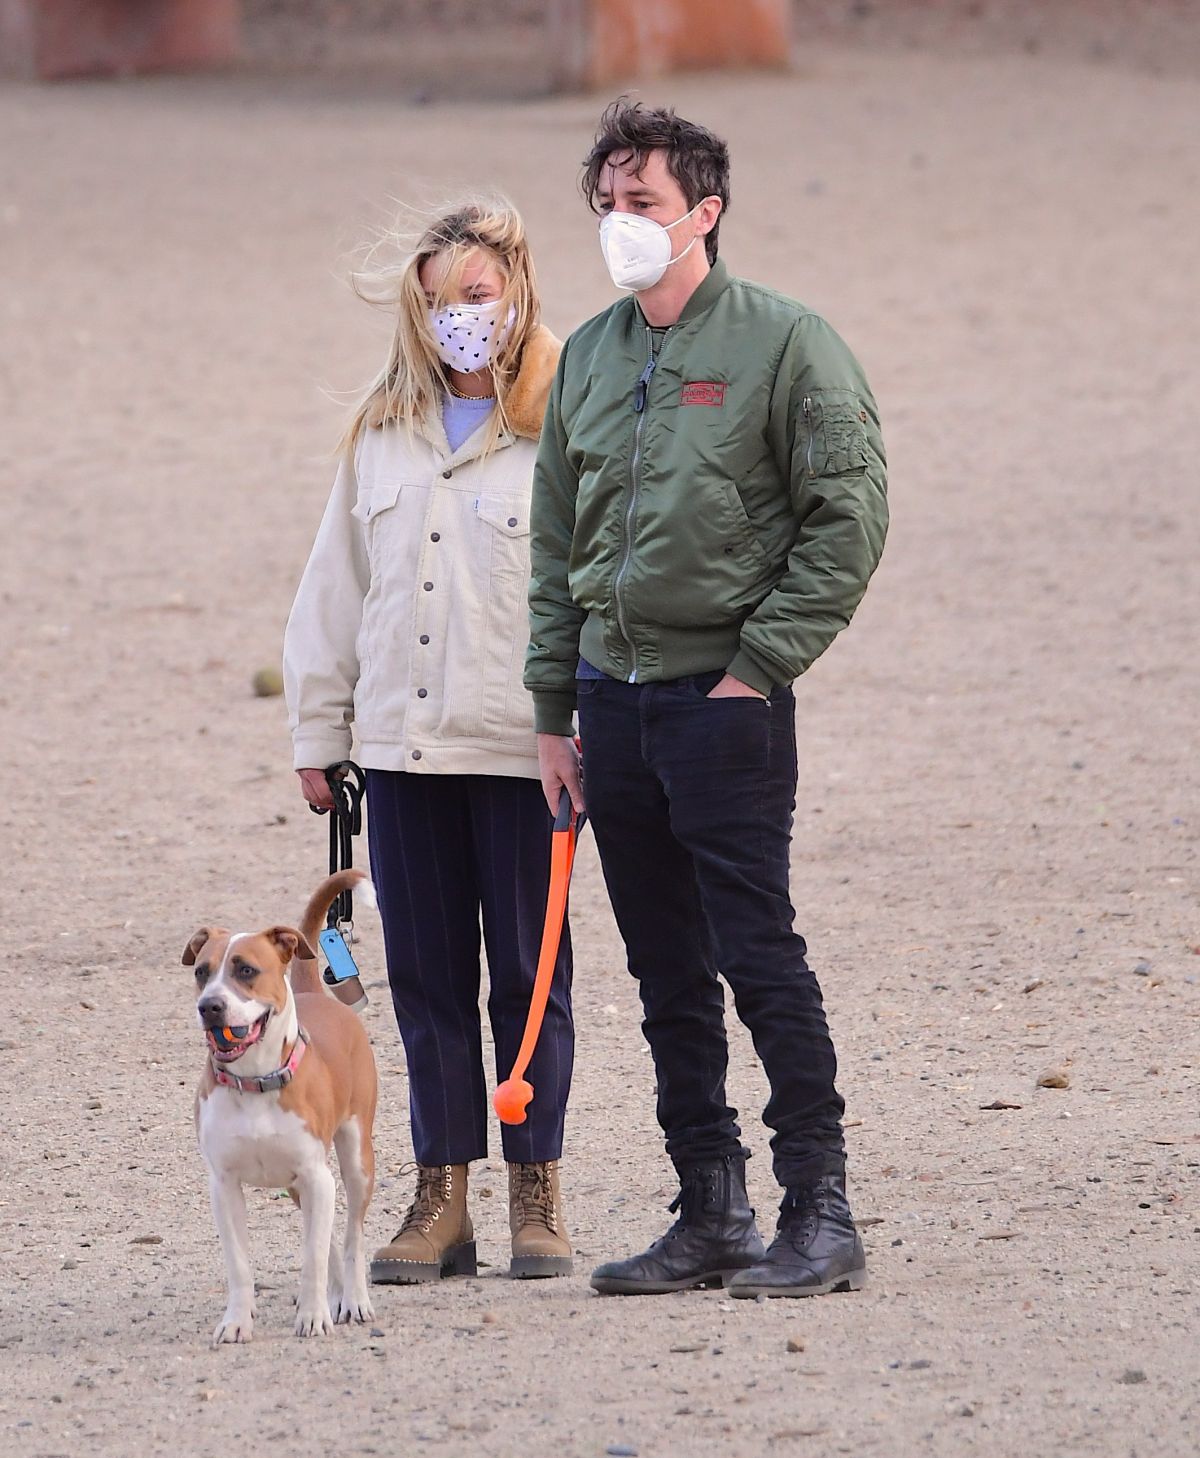 florence-pugh-and-zach-braff-out-at-a-dog-park-in-los-angeles-12-14-2020-2.jpg